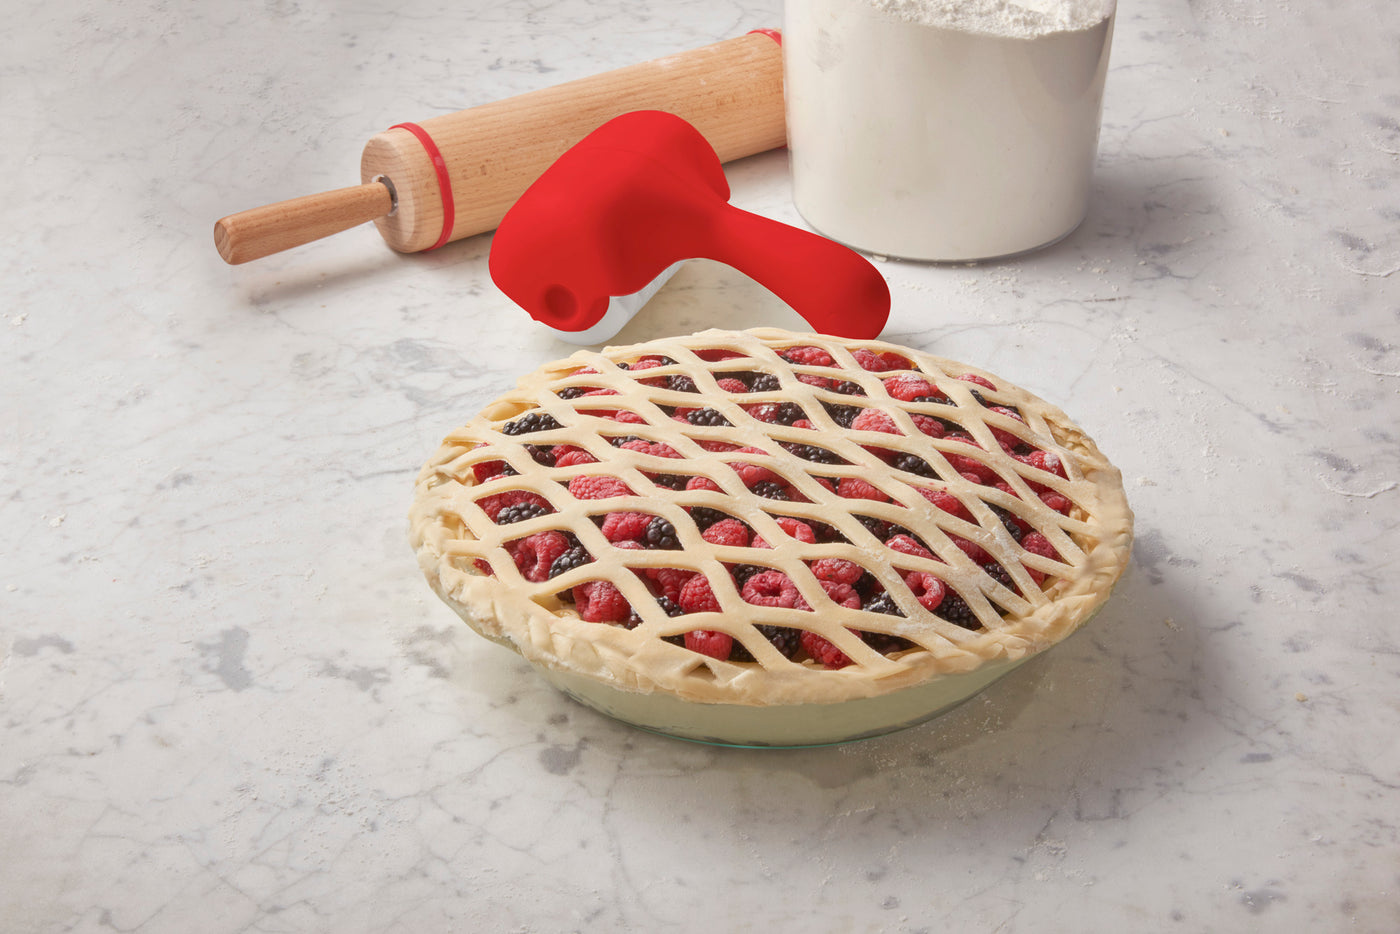 Talisman Designs Pie Top Cutter for 10 inch Pies, Autumn, Red